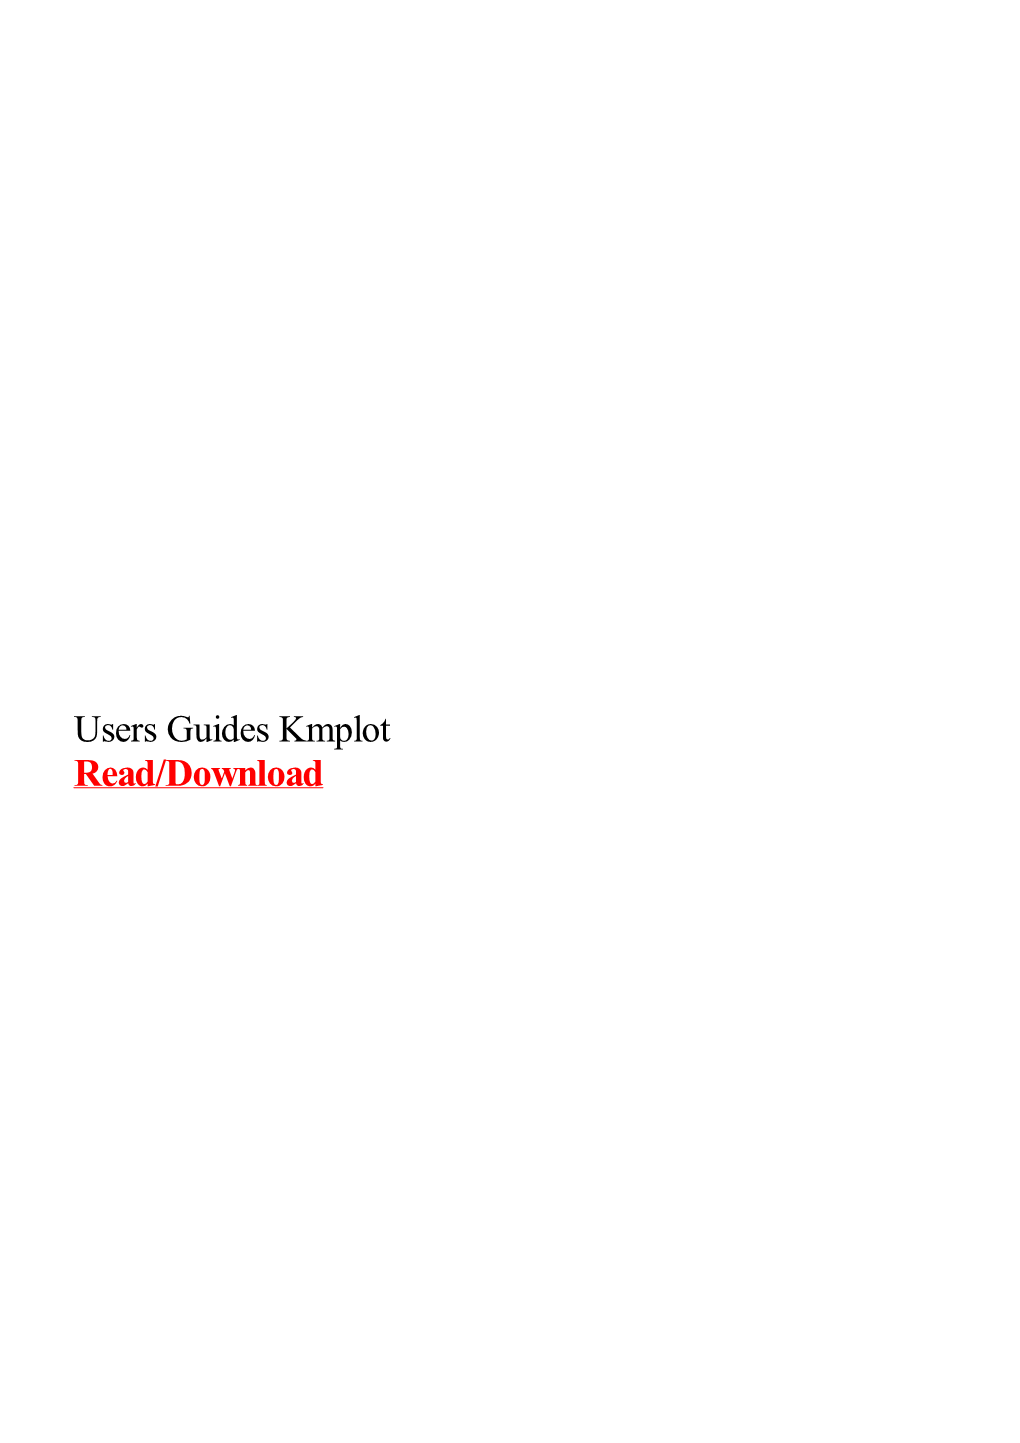 Users Guides Kmplot